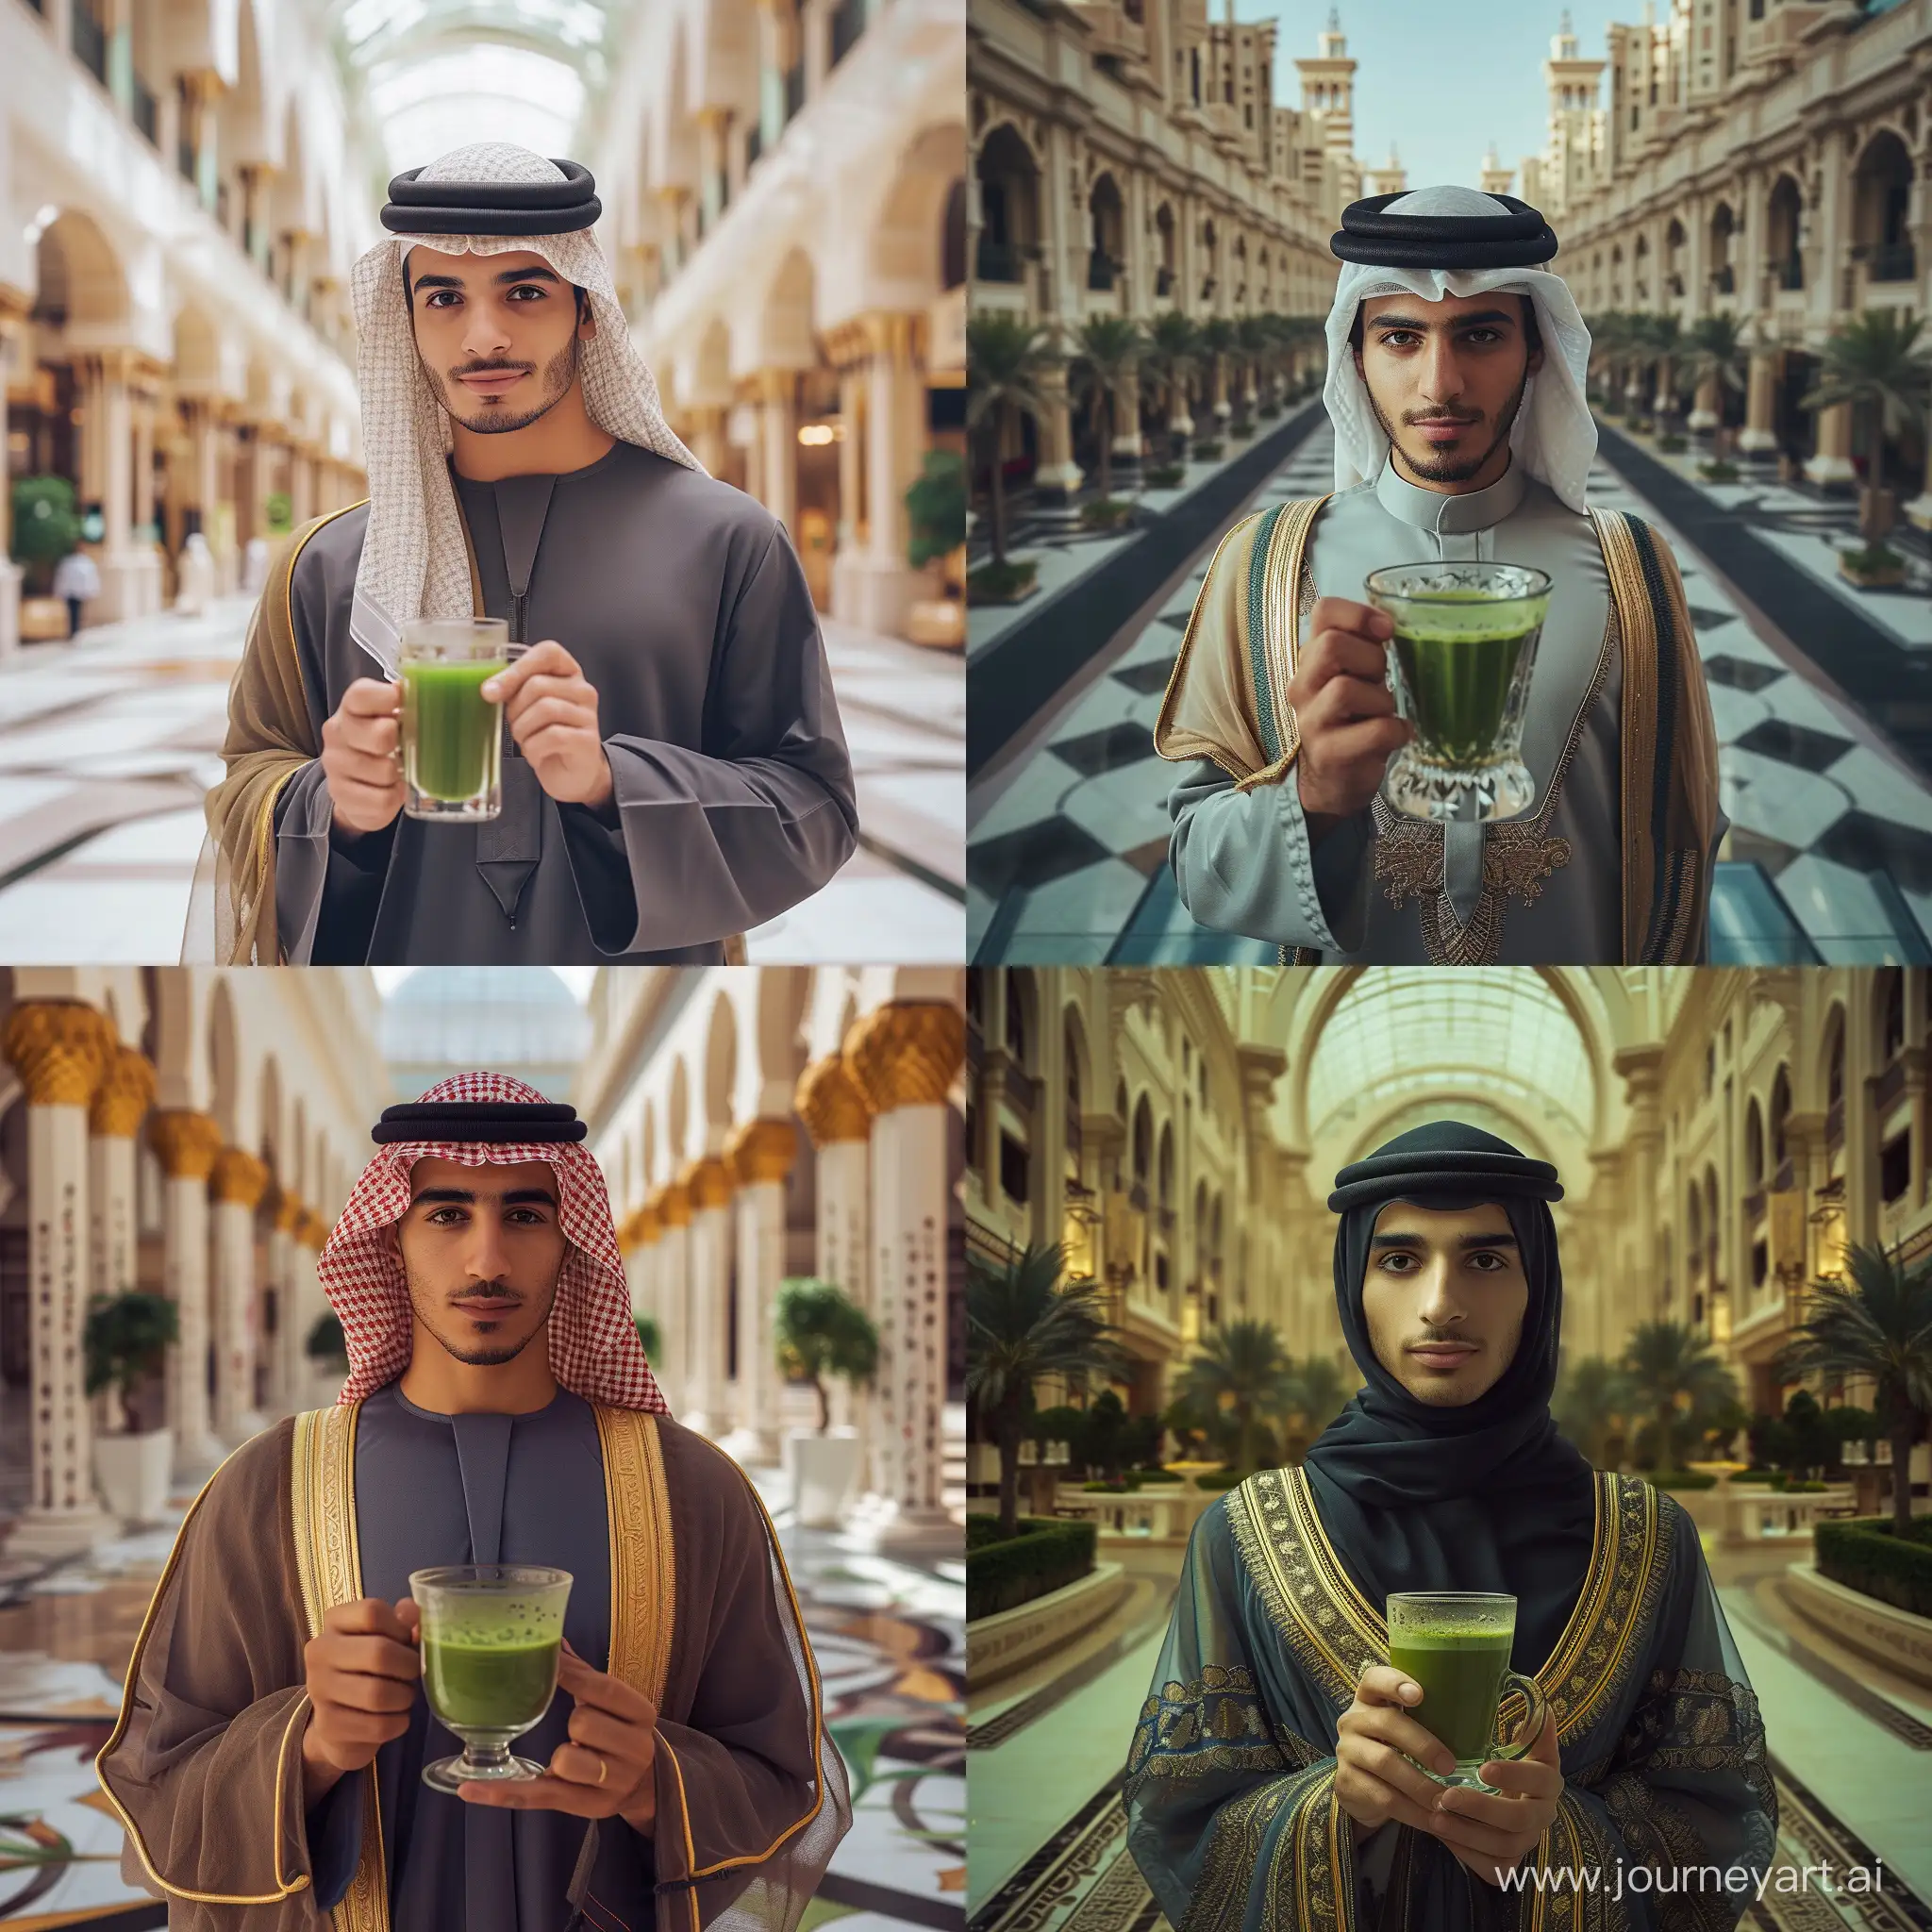 Real and natural photo of a young man in Arabic dress holding a cup of matcha tea. The glass of matcha tea should be clear. The space around him is a large and luxurious street. Full detail of matcha tea cup and man's face.